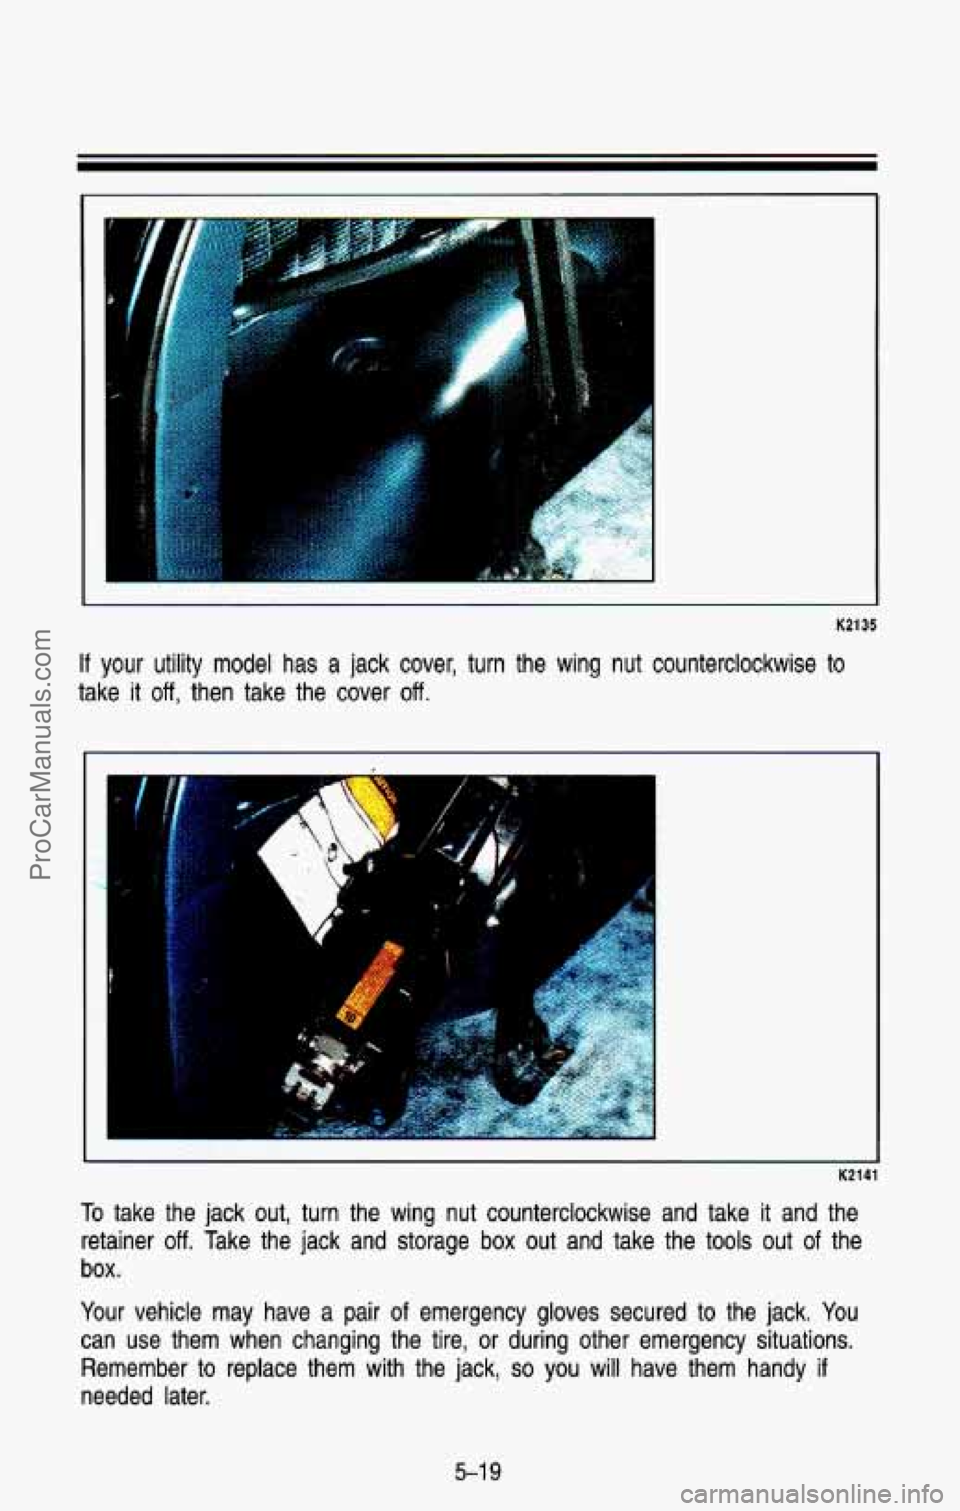 CHEVROLET SUBURBAN 1993  Owners Manual K2135 
If your  utility model has a jack cover, turn  the  wing  nut  counterclockwise to 
take it off, then take  the  cover off. 
". .. . 
K214 
To take  the  jack out,  turn  the  wing  nut  counte